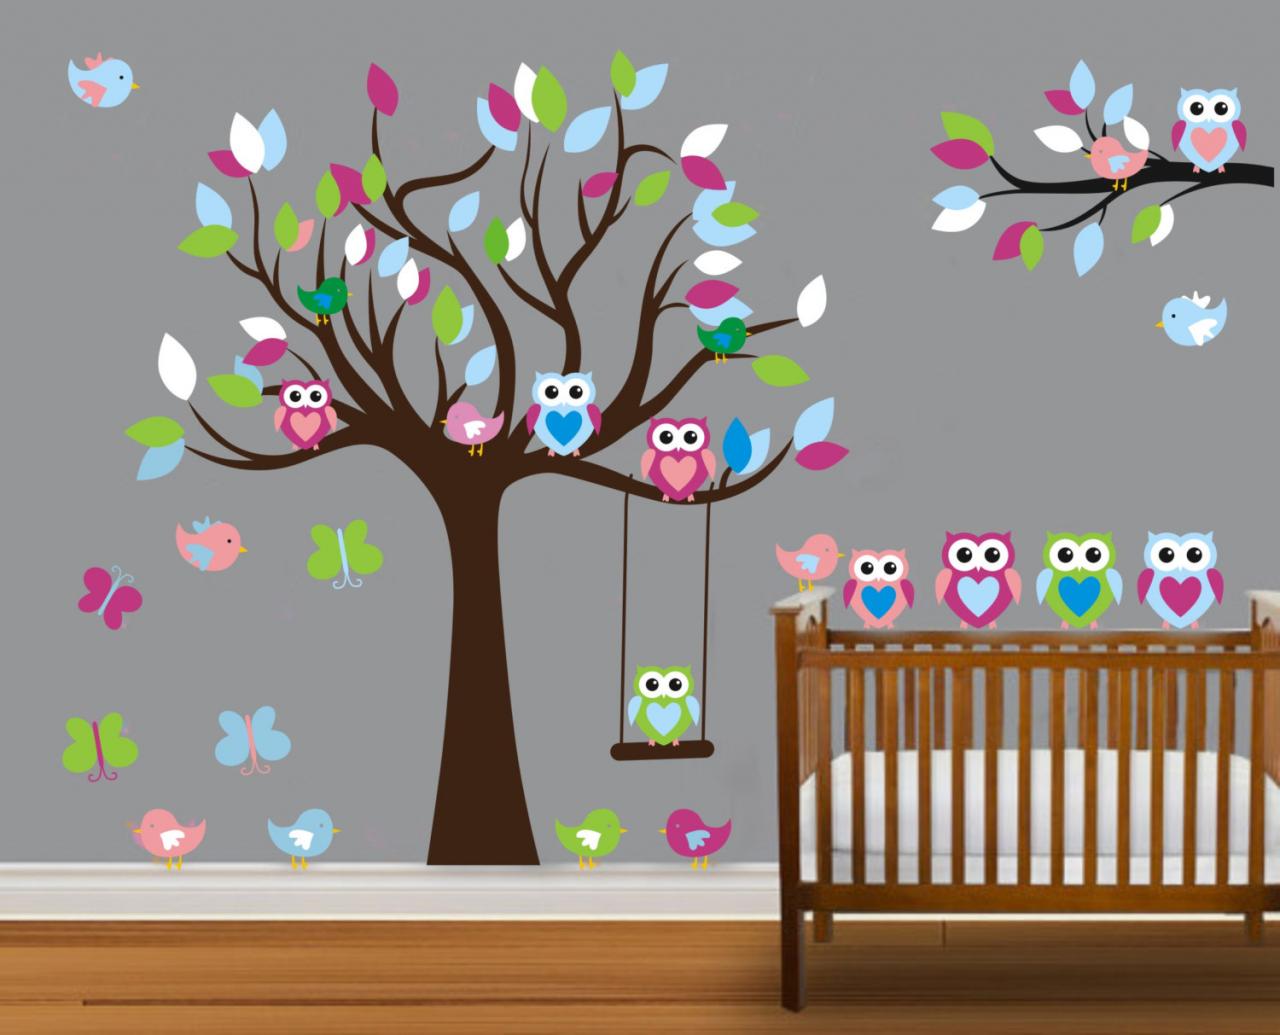 Vinyl Wall Decal Colorful Nursery Cute Owl Family Tree Trees Owls Home House Art Wall Decals Wall Sticker Stickers Baby Room Kid 815